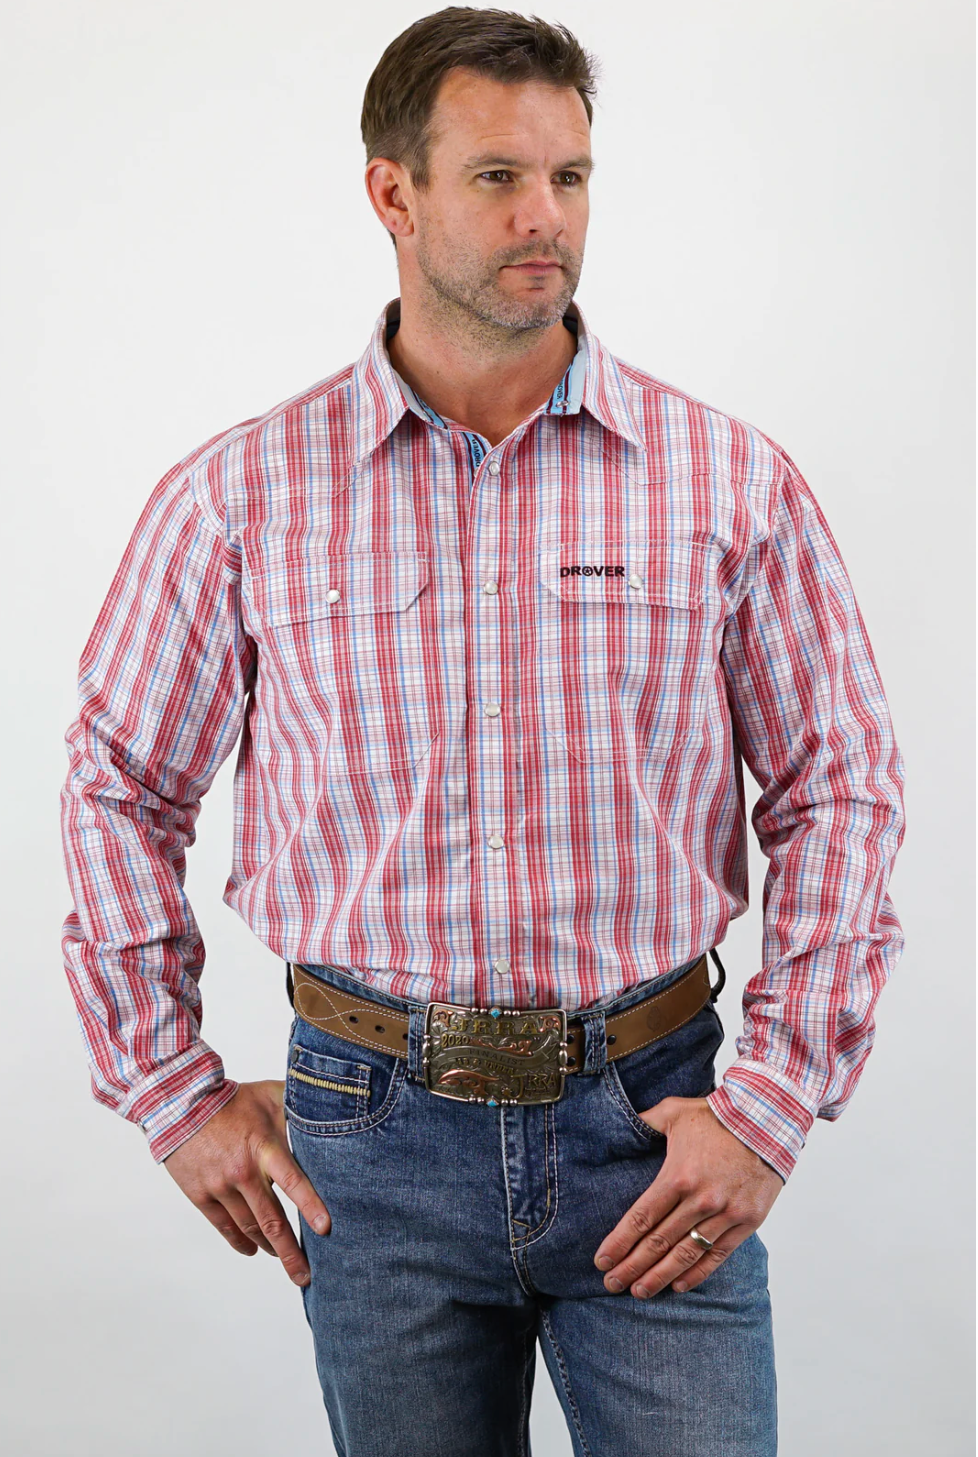 Drover Signature Series - Twister - Red, White and Blue, Option Cuff, Pearl Snap, Classic Fit Shirt